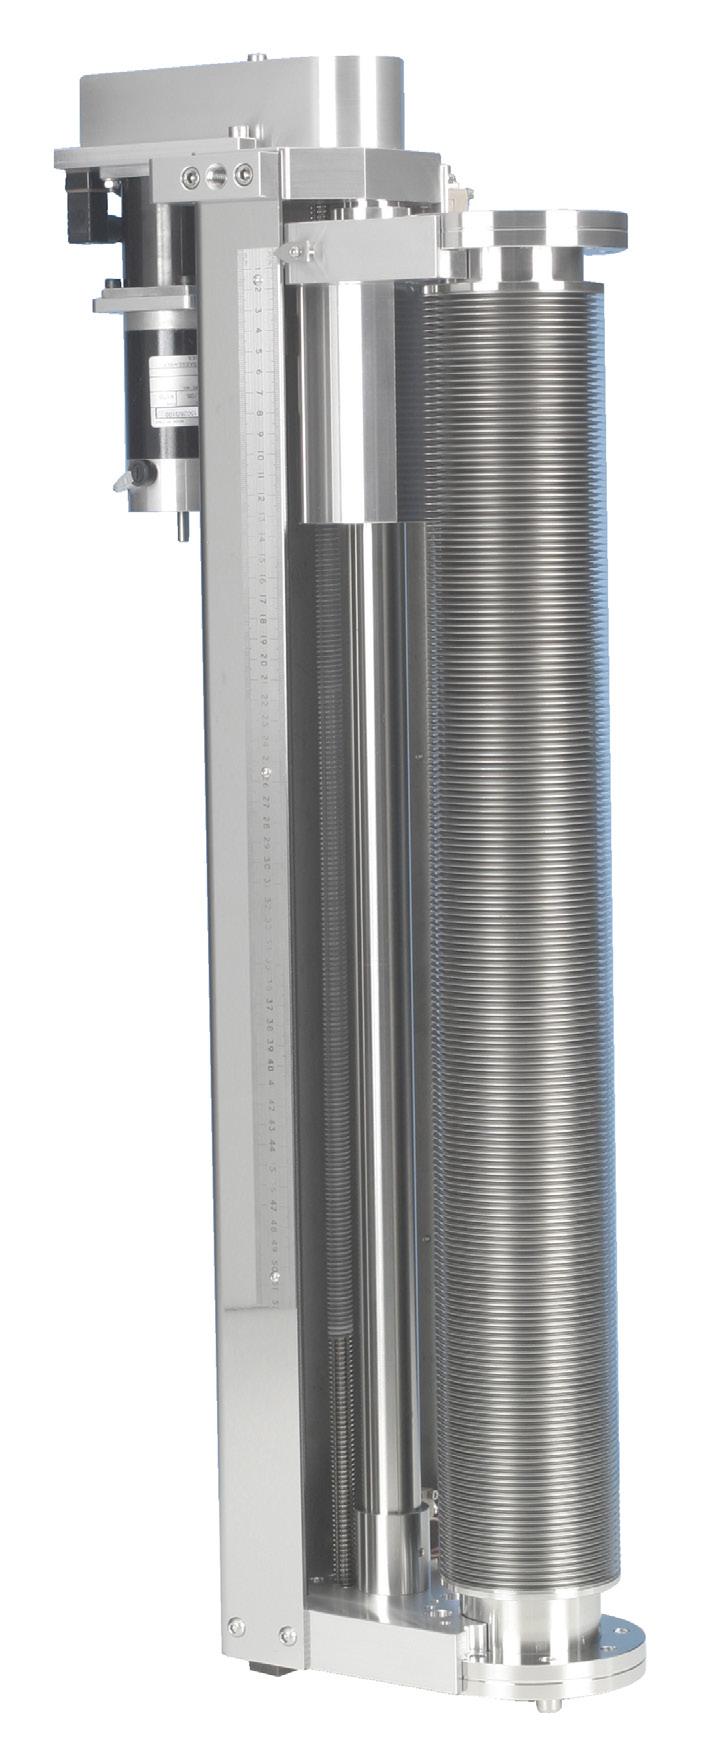 Long Travel Linear Shift Mechanism Rotary Source LSML Shutters xample LSML imensions BOR F XTN = A RTRAT = B The LSML provides strokes of up to 1000mm (39") with high precision motion maintained